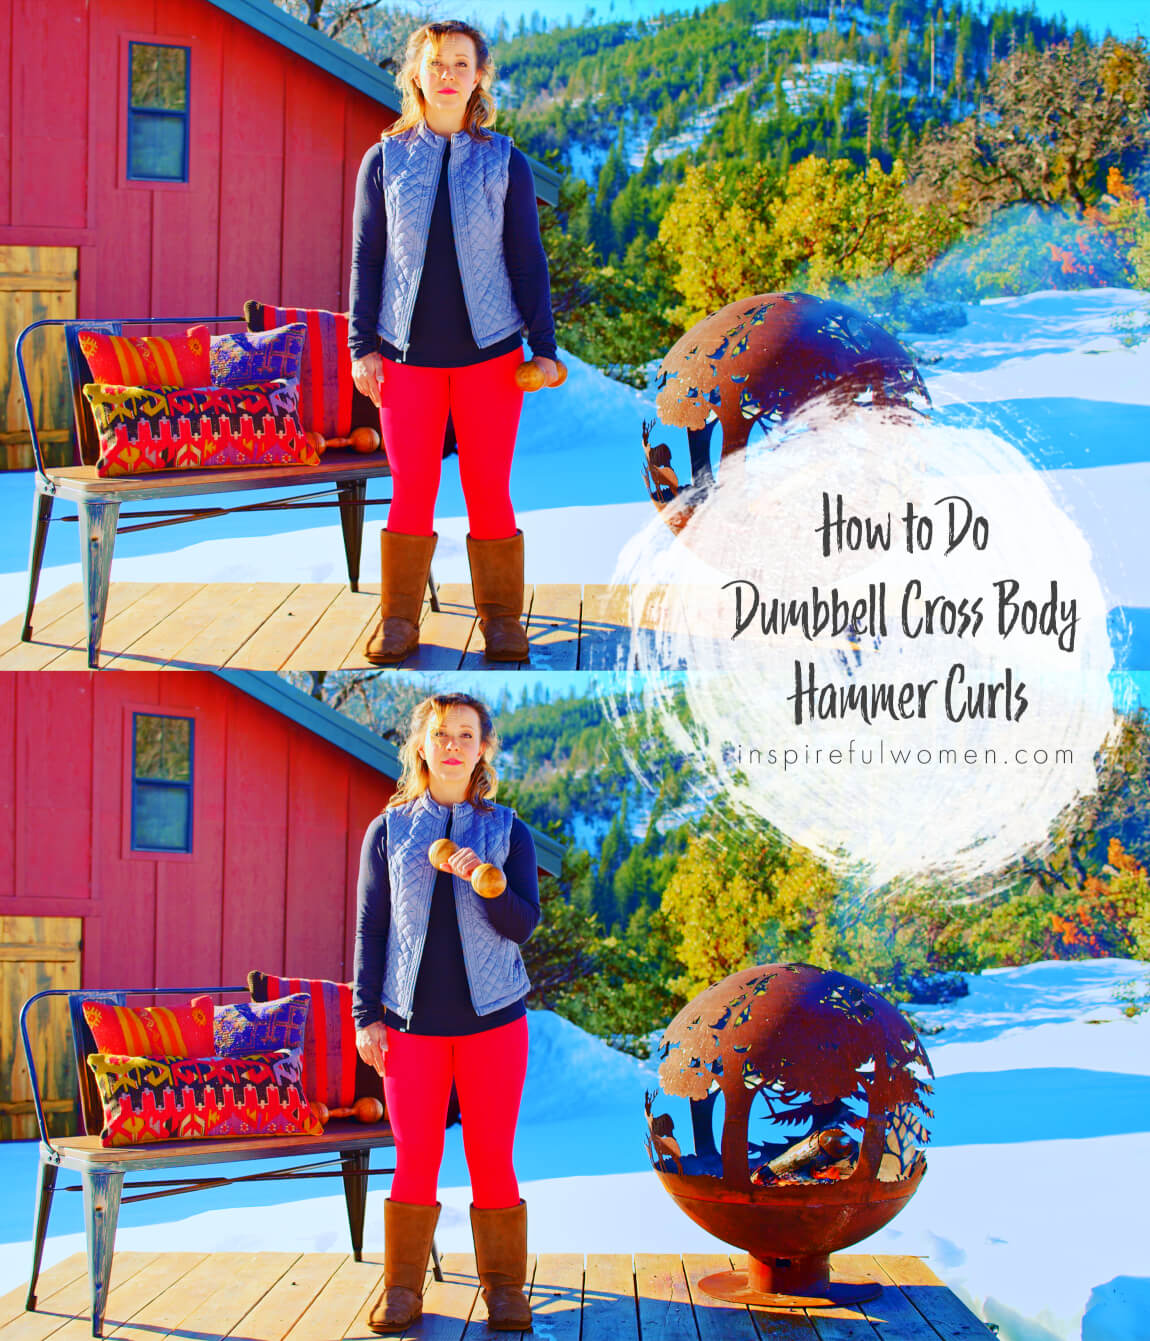 how-to-do-dumbbell-cross-body-hammer-curls-bicep-exercise-at-home-women-40-plus